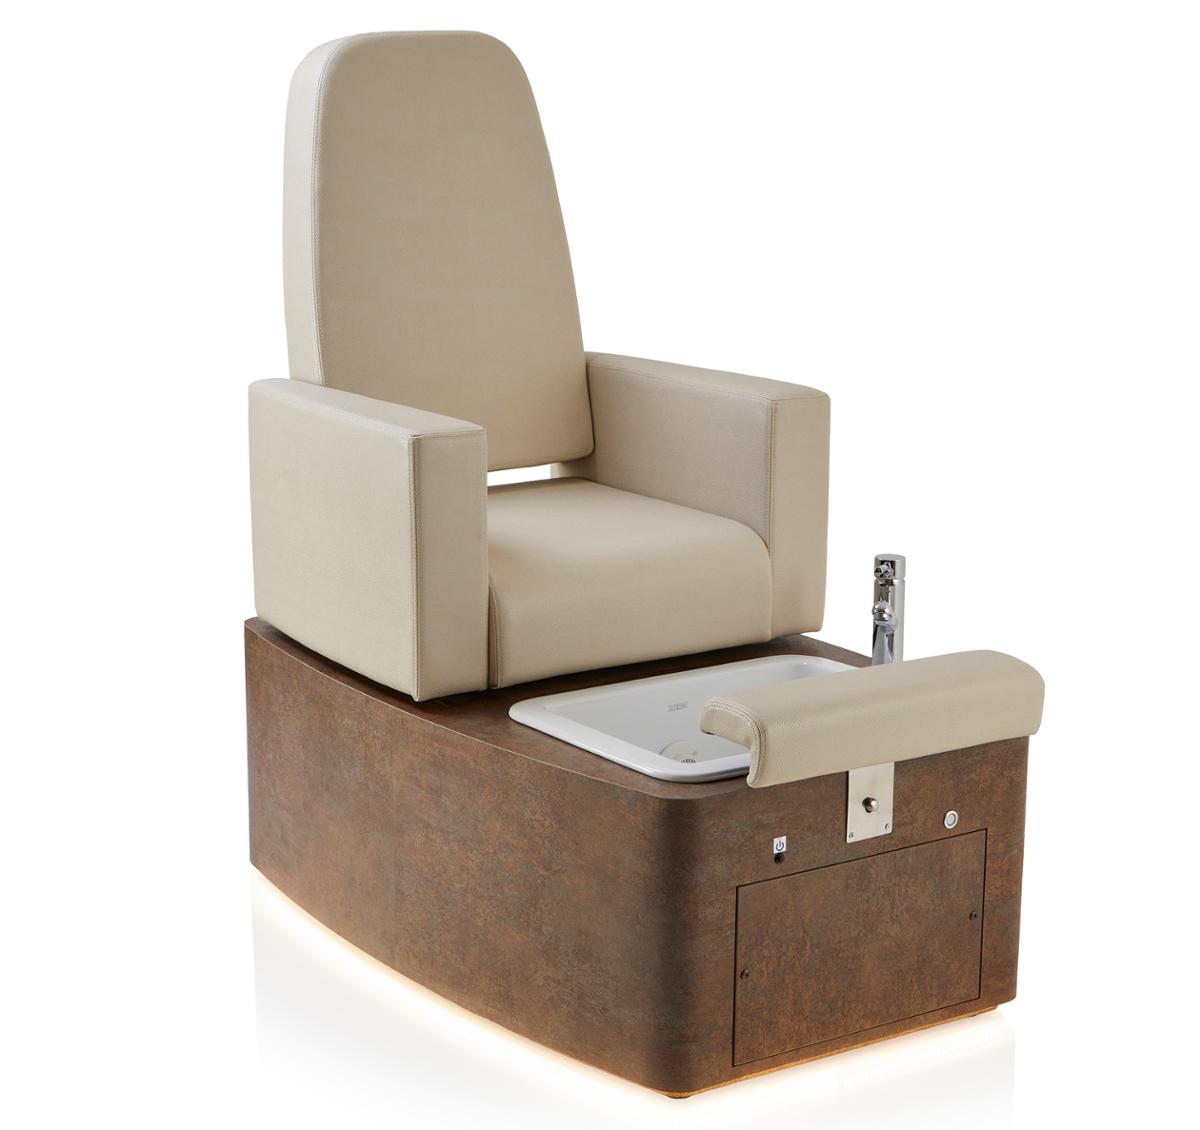 The Sienna Pedicure Chair is the range's premium pedicure chair model / REM UK